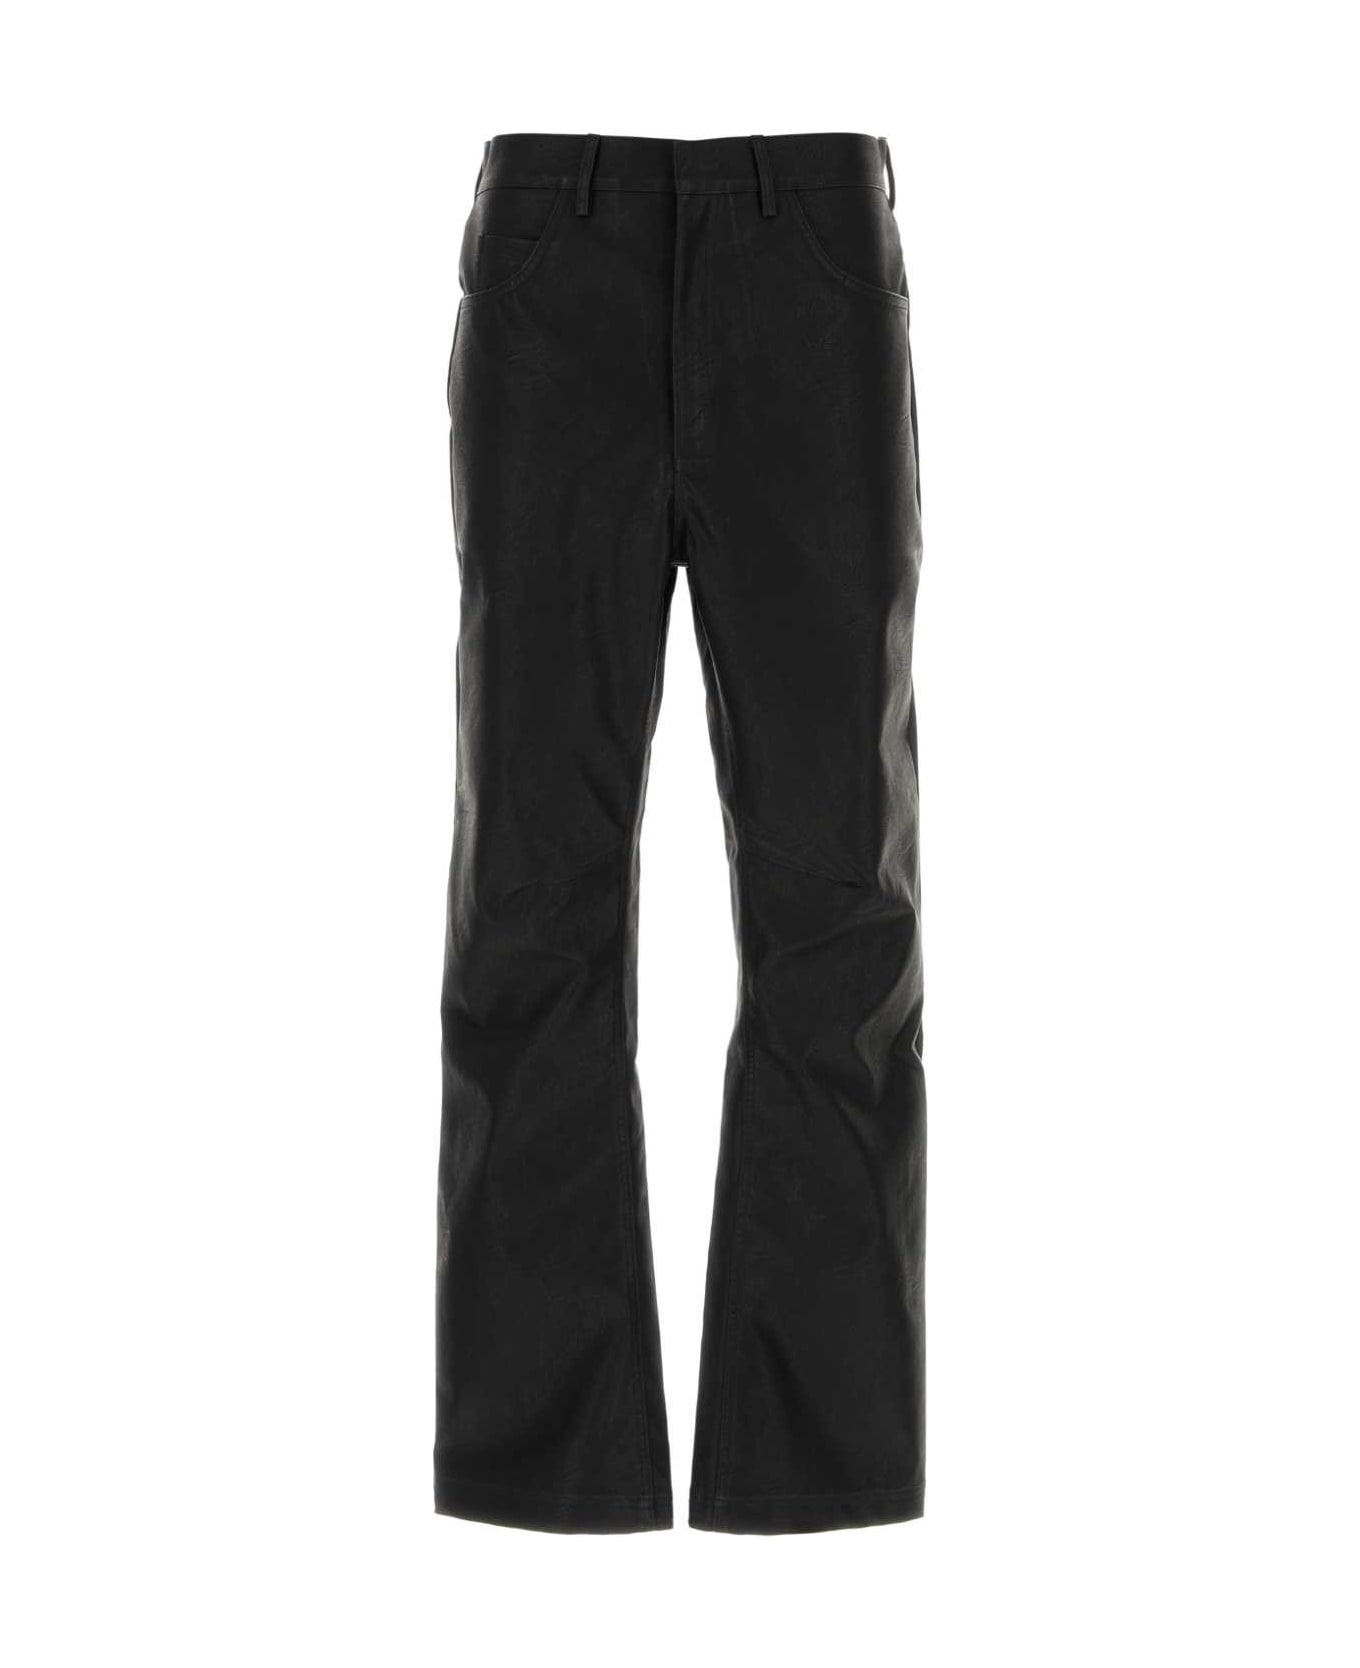 Entire Studios Black Synthetic Leather Pant - BLACK